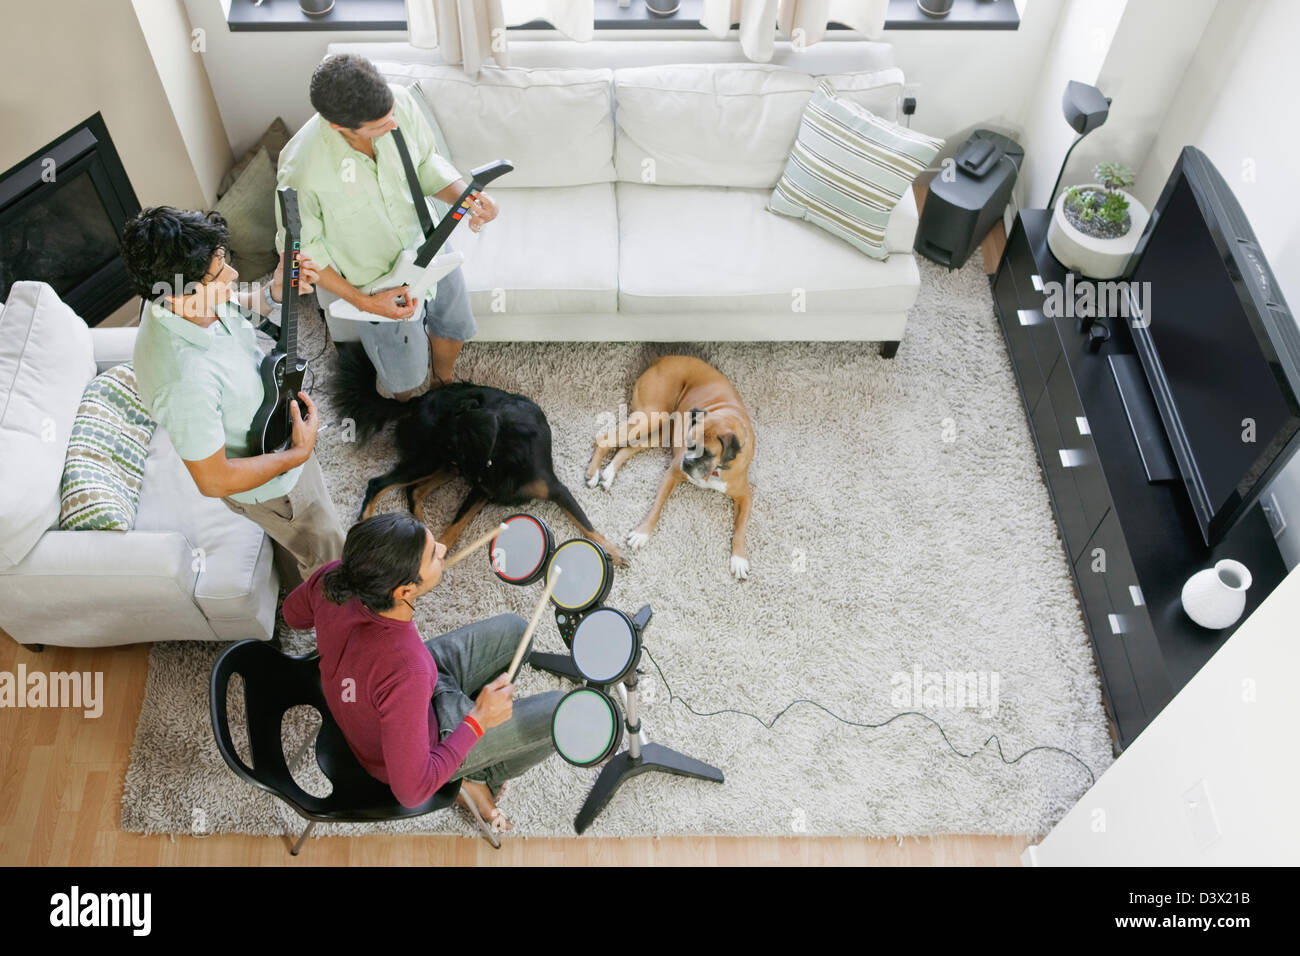 Mexian-American Men Friends Enjoying Playing Video Game on a Flat-Screen TV at Home Stock Photo